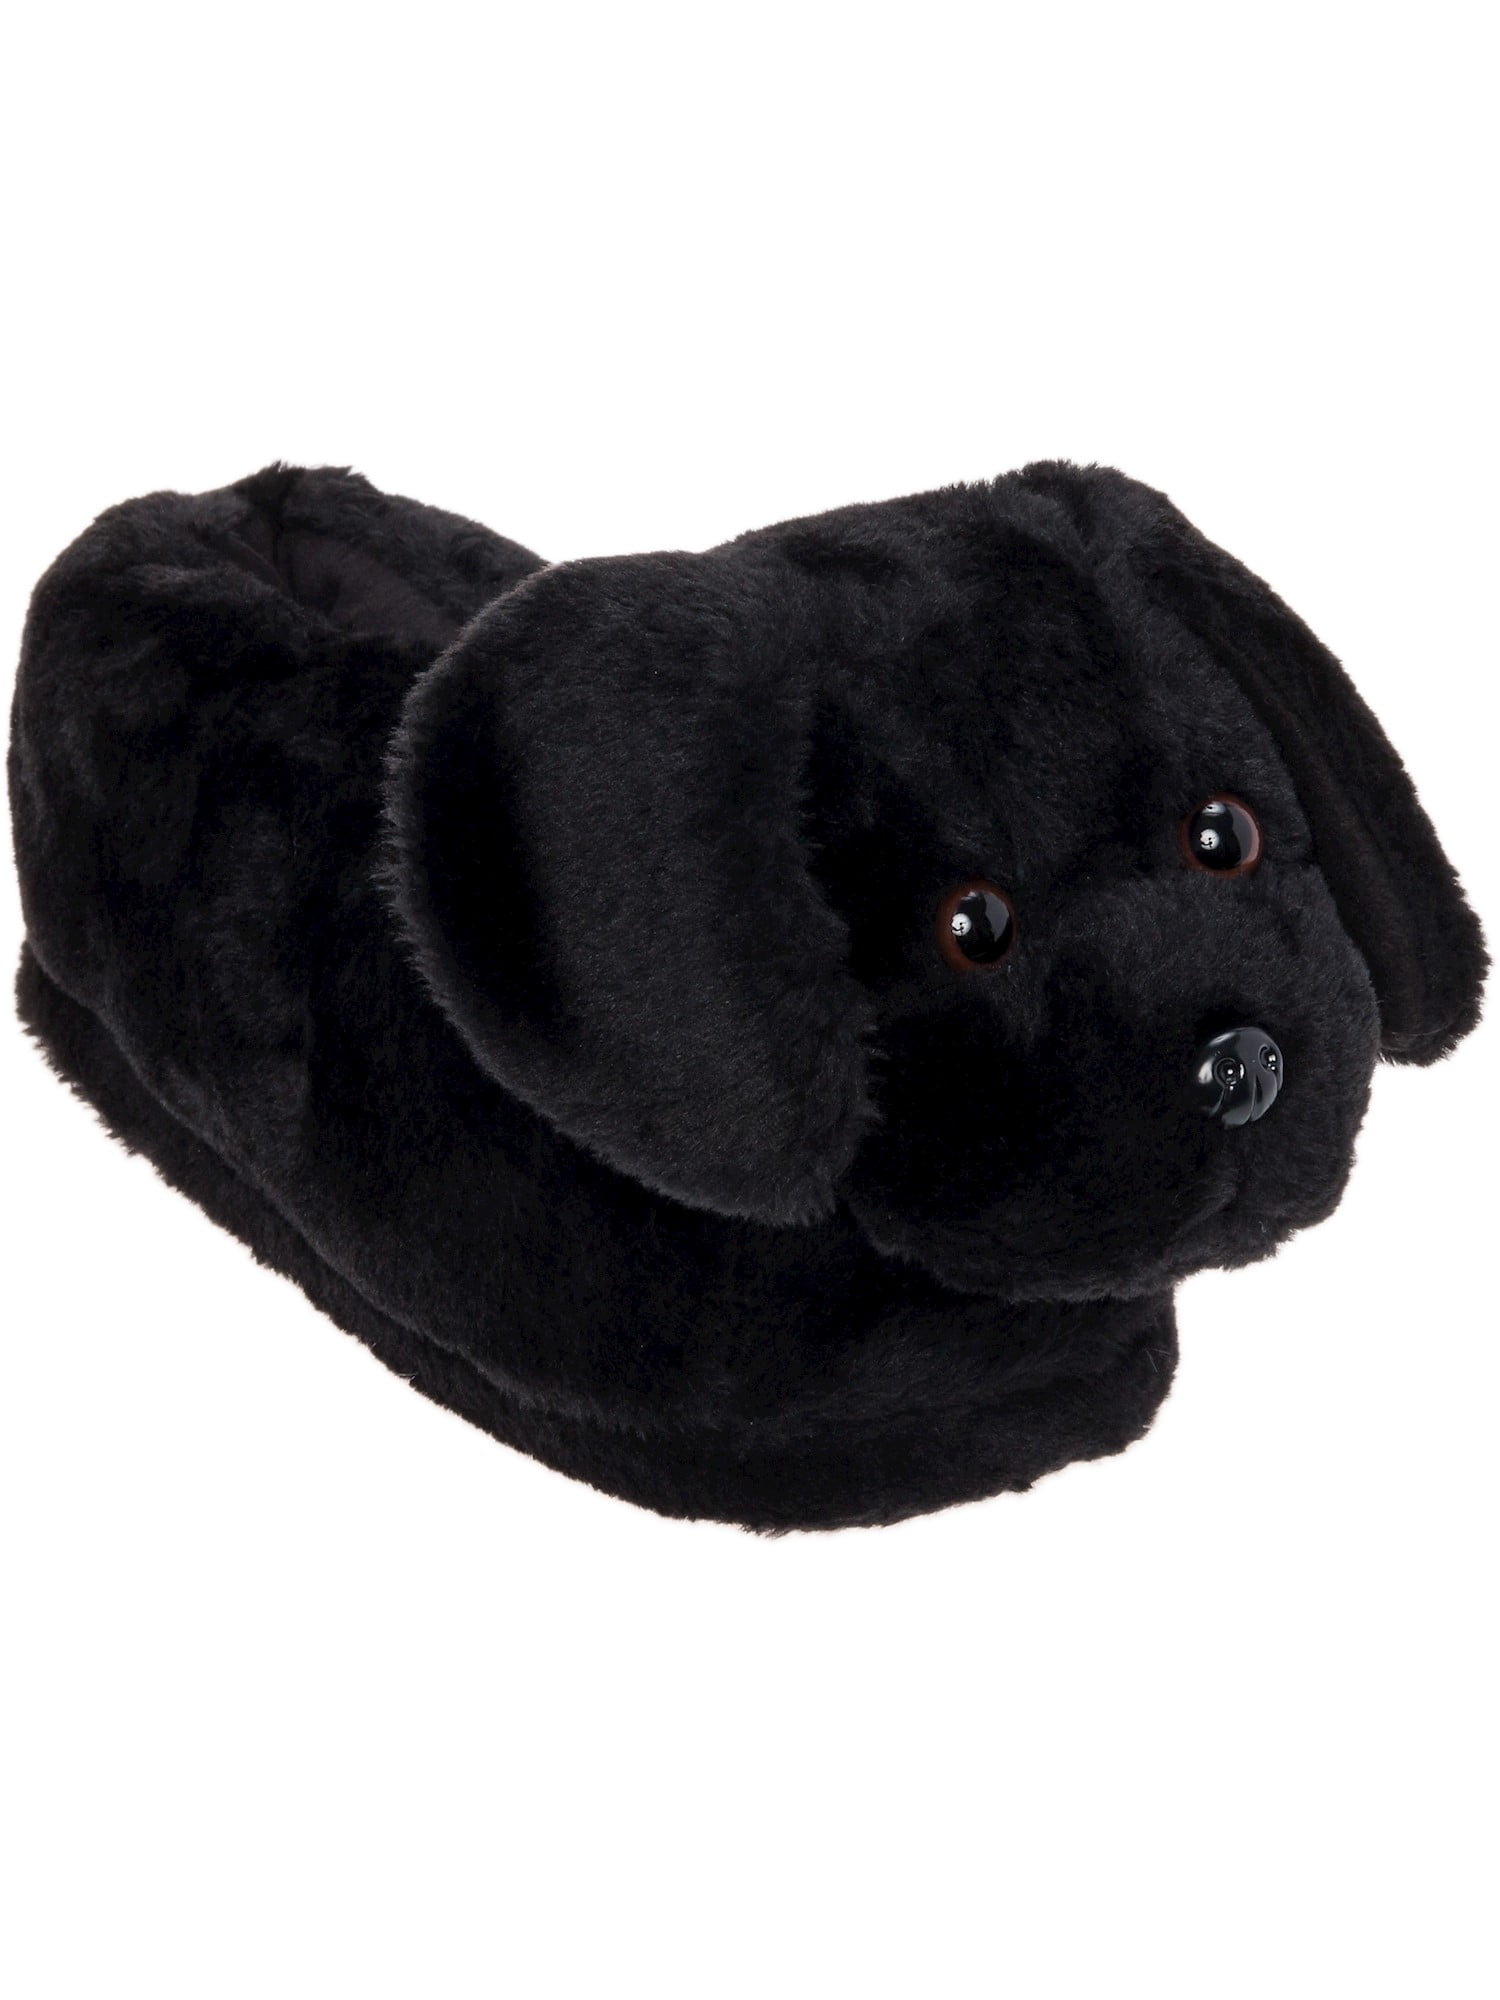 Silver Lilly - Black Lab Slippers 